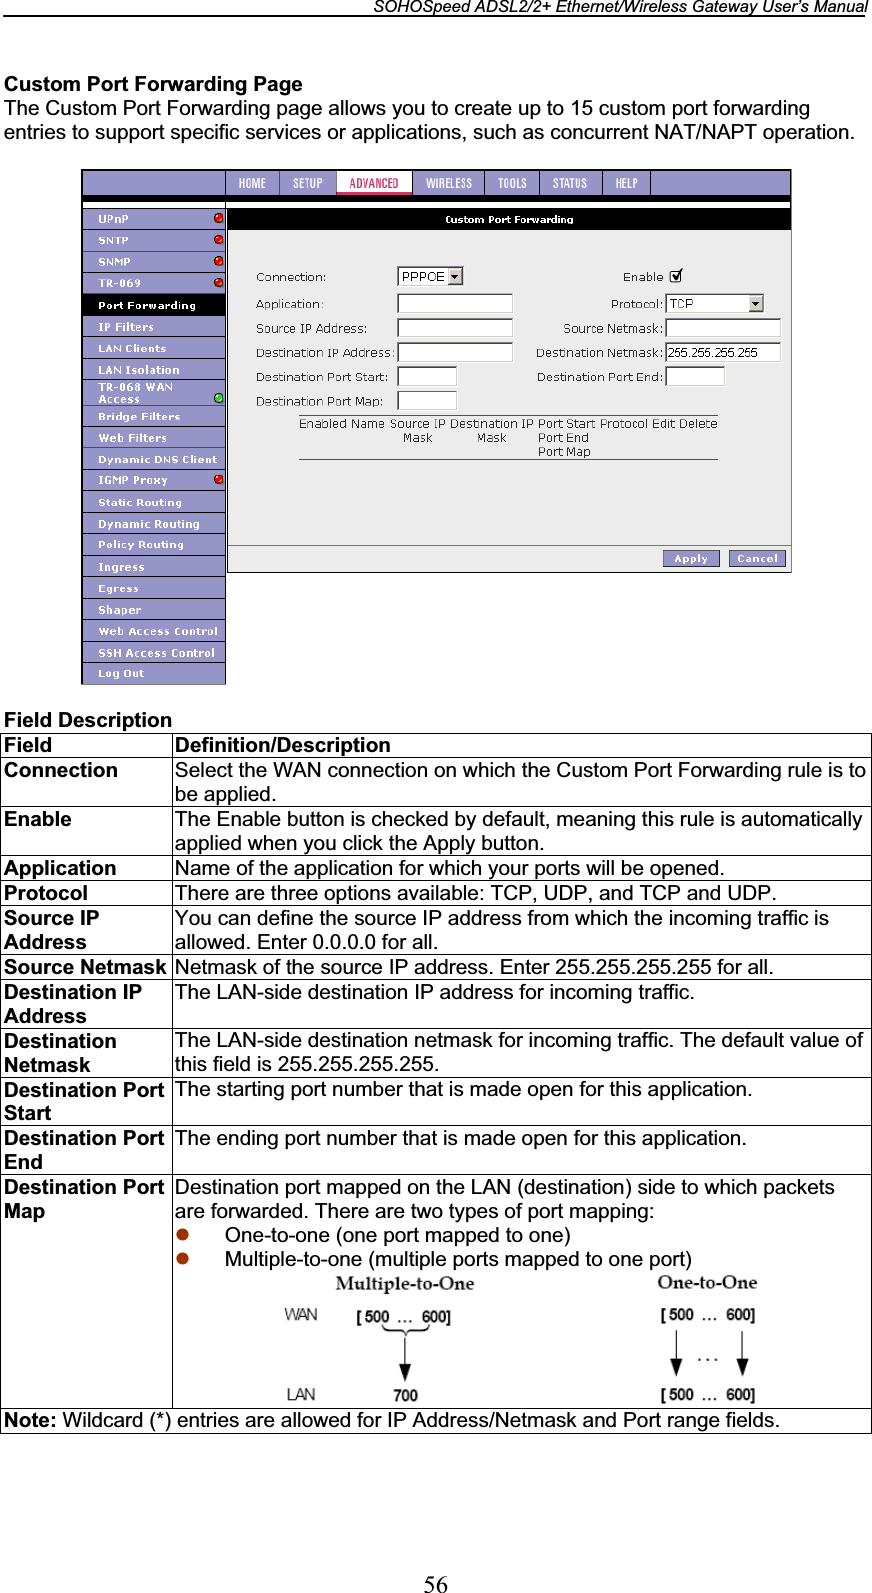 SOHOSpeed ADSL2/2+ Ethernet/Wireless Gateway User’s Manual 56Custom Port Forwarding Page The Custom Port Forwarding page allows you to create up to 15 custom port forwarding entries to support specific services or applications, such as concurrent NAT/NAPT operation. Field Description Field Definition/Description Connection  Select the WAN connection on which the Custom Port Forwarding rule is to be applied. Enable The Enable button is checked by default, meaning this rule is automatically applied when you click the Apply button. Application Name of the application for which your ports will be opened. Protocol There are three options available: TCP, UDP, and TCP and UDP. Source IP Address You can define the source IP address from which the incoming traffic is allowed. Enter 0.0.0.0 for all. Source Netmask Netmask of the source IP address. Enter 255.255.255.255 for all. Destination IP Address The LAN-side destination IP address for incoming traffic. DestinationNetmask The LAN-side destination netmask for incoming traffic. The default value of this field is 255.255.255.255. Destination Port StartThe starting port number that is made open for this application. Destination Port EndThe ending port number that is made open for this application. Destination Port MapDestination port mapped on the LAN (destination) side to which packets are forwarded. There are two types of port mapping: z One-to-one (one port mapped to one) z Multiple-to-one (multiple ports mapped to one port) Note: Wildcard (*) entries are allowed for IP Address/Netmask and Port range fields. 